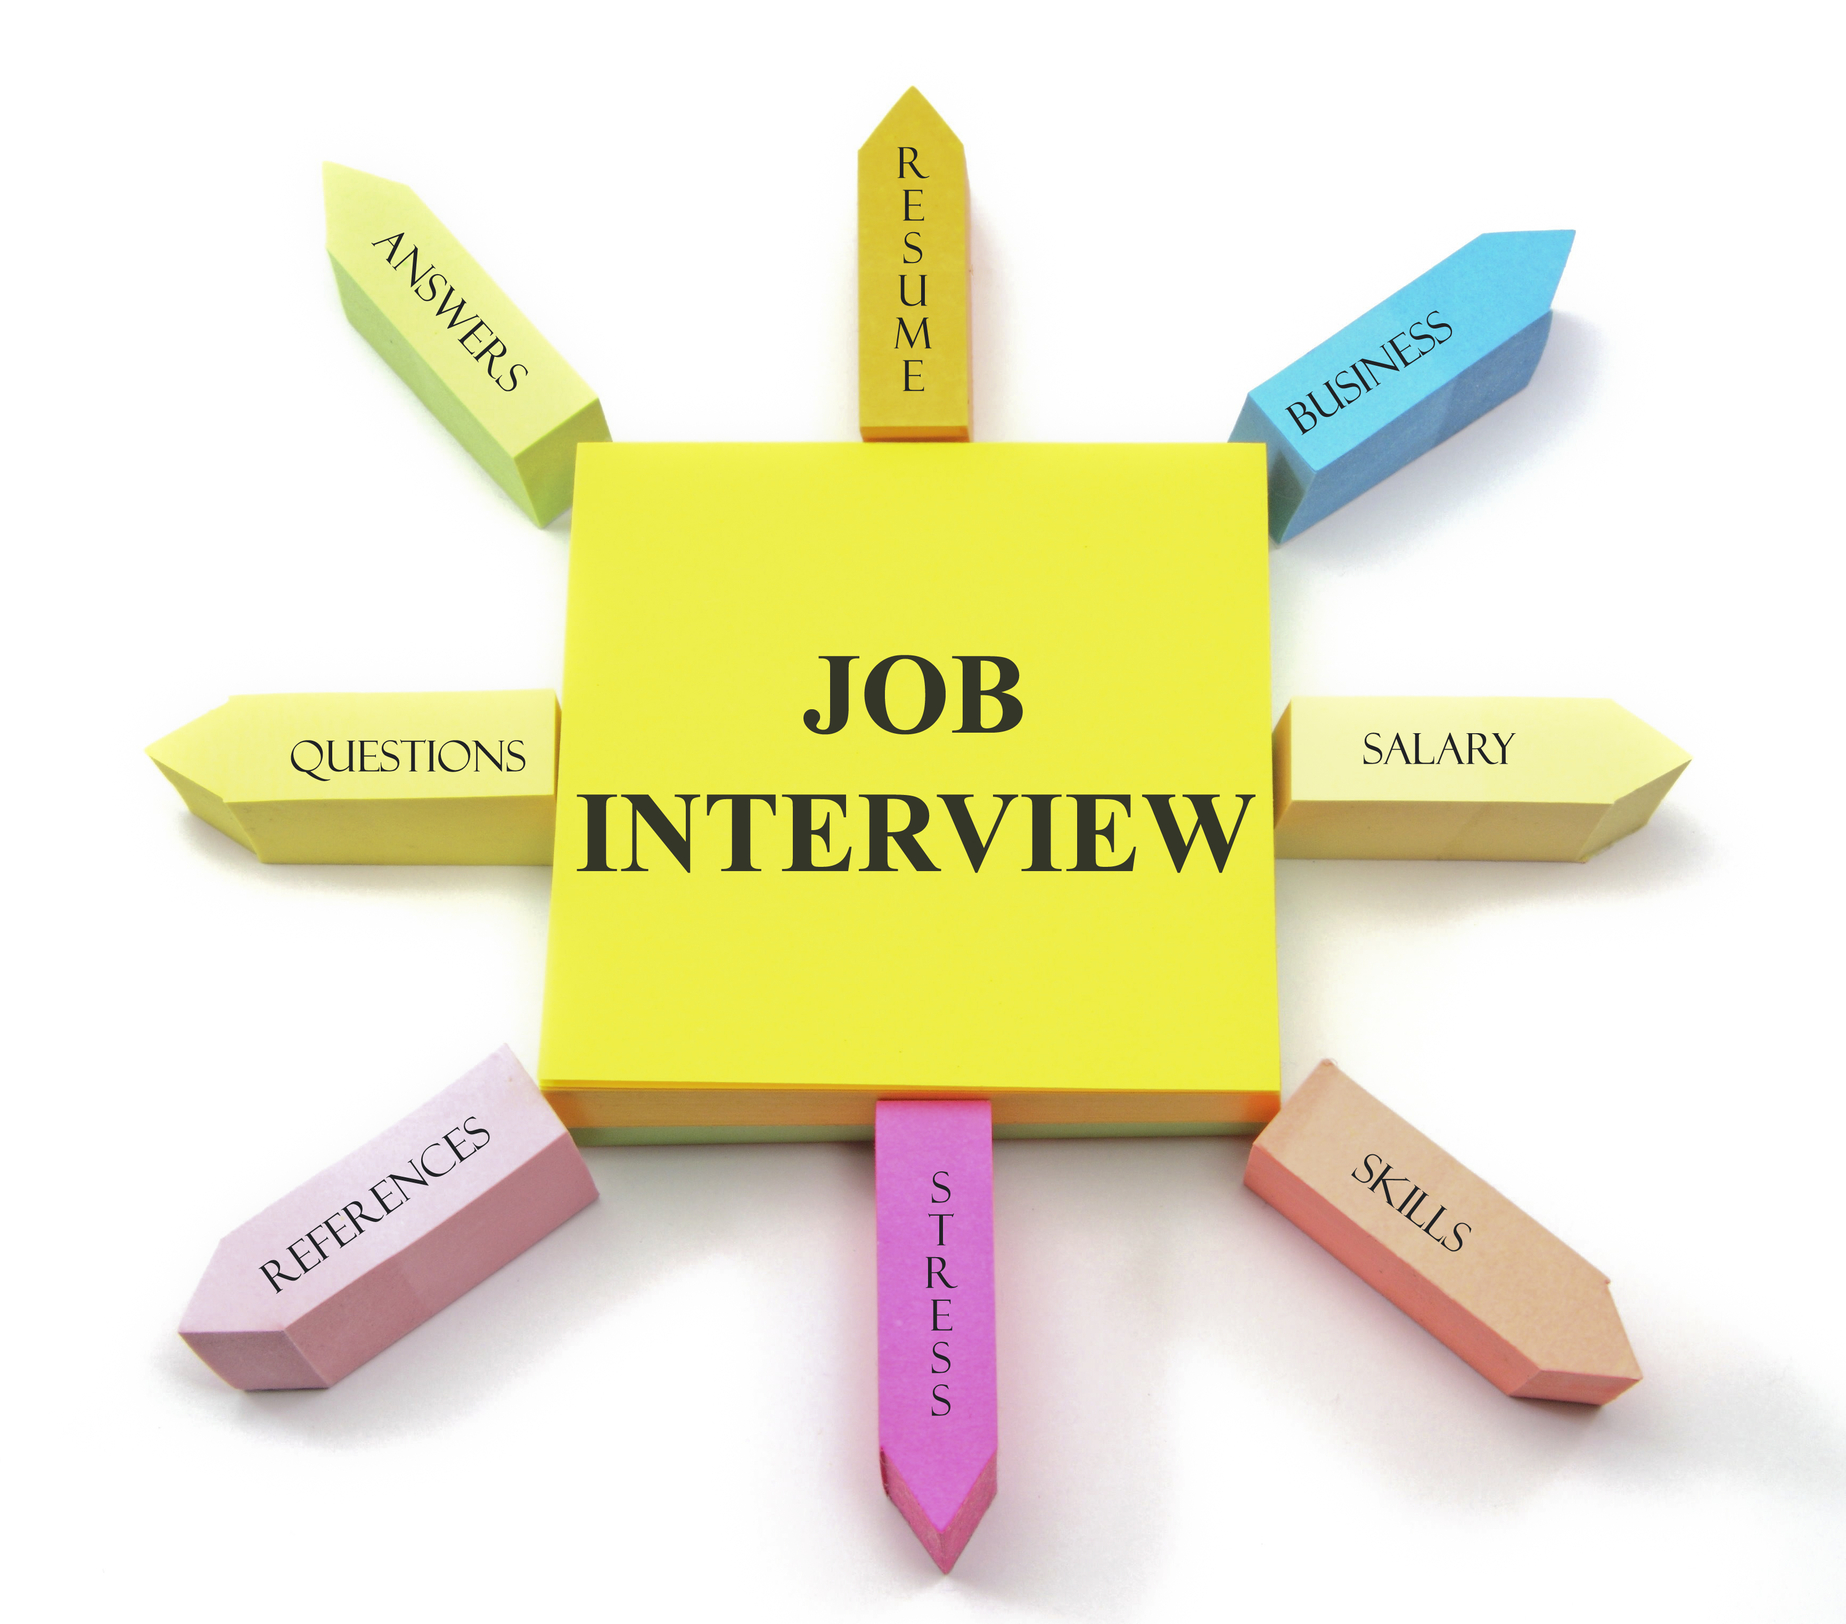 7 steps for a job interview